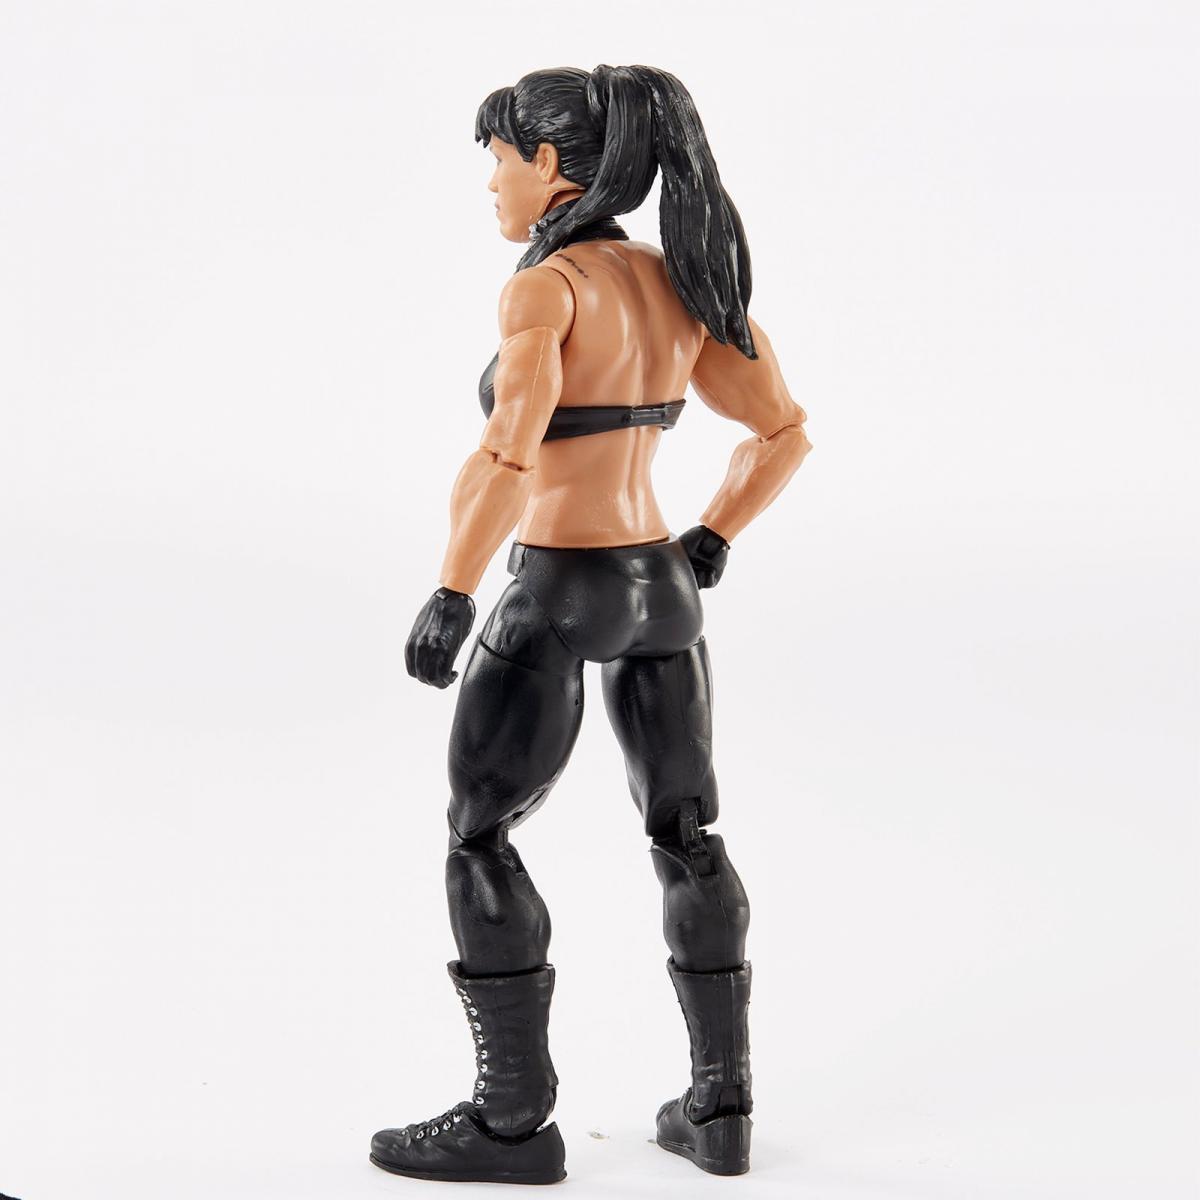 2022 WWE Mattel Elite Collection Legends Series 14 Chyna [Exclusive]